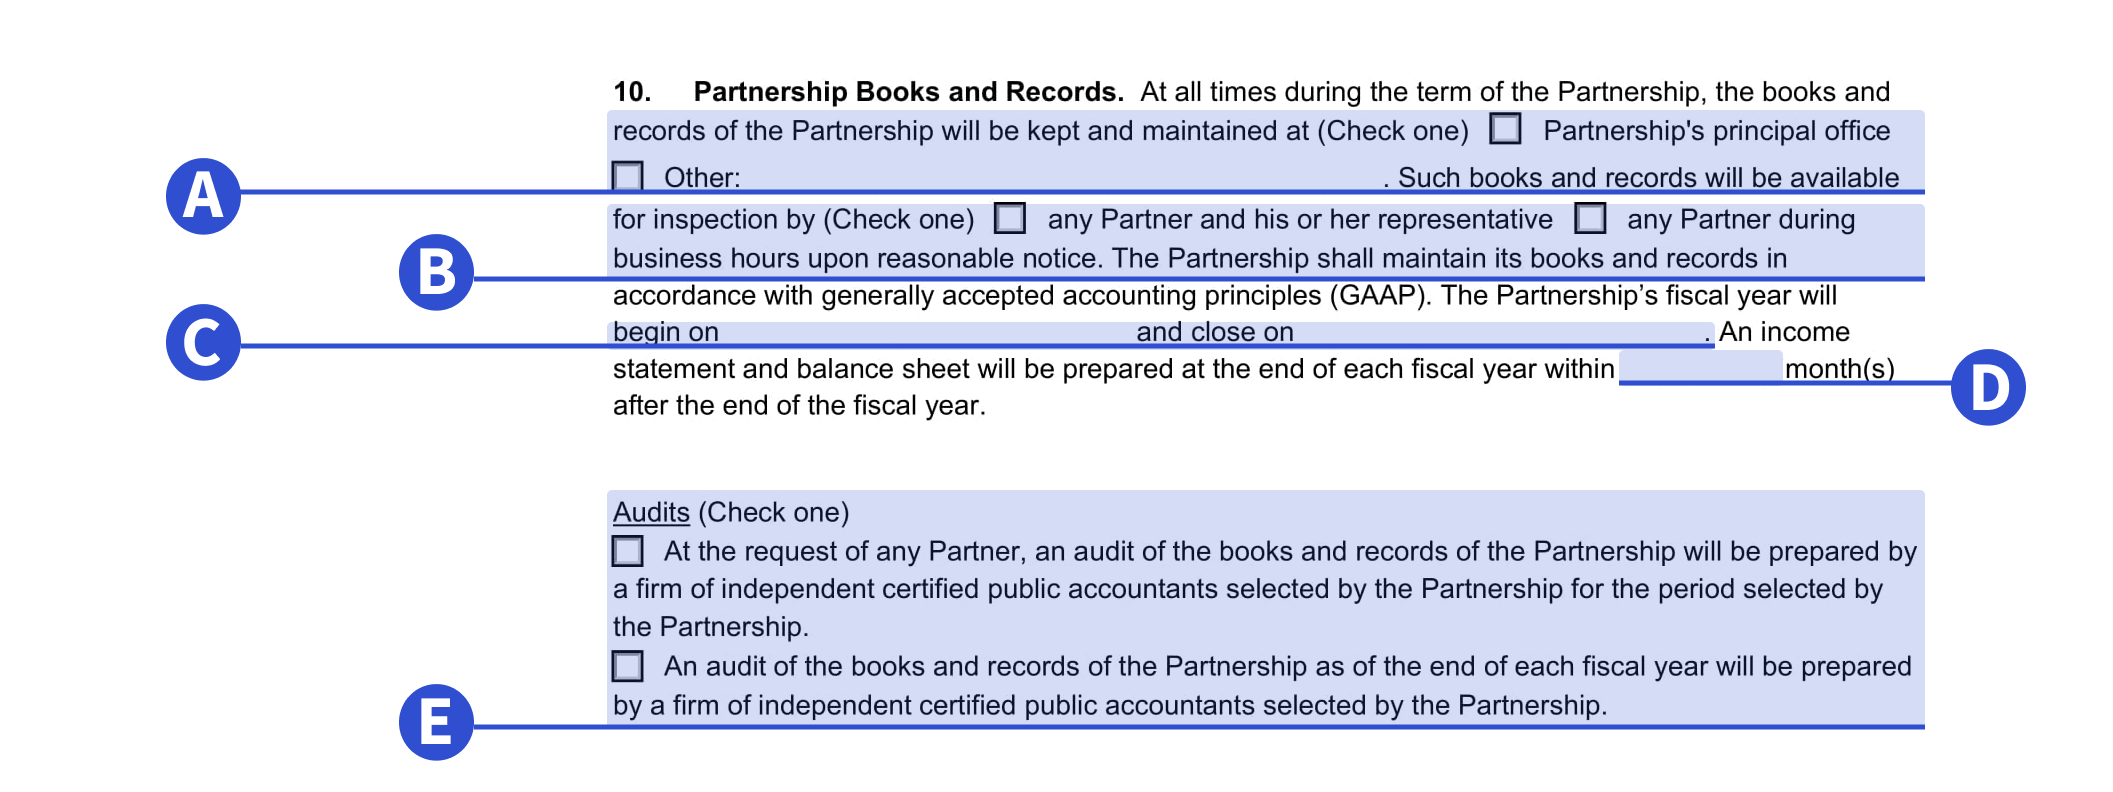 Where to detail partnership books and records in our partnership agreement template.